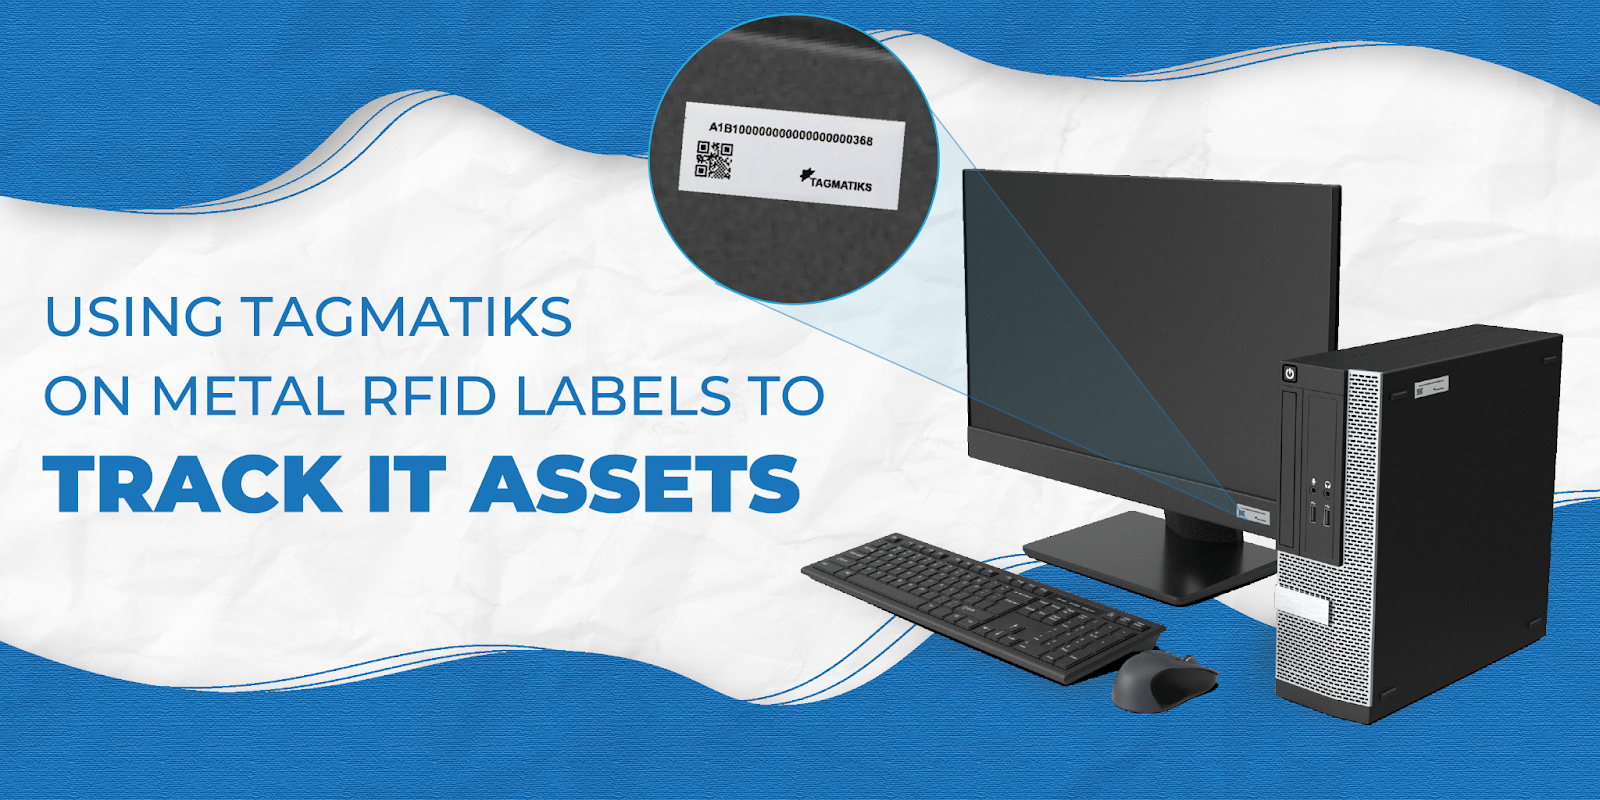 On Metal RFID Labels for IT Asset Tracking